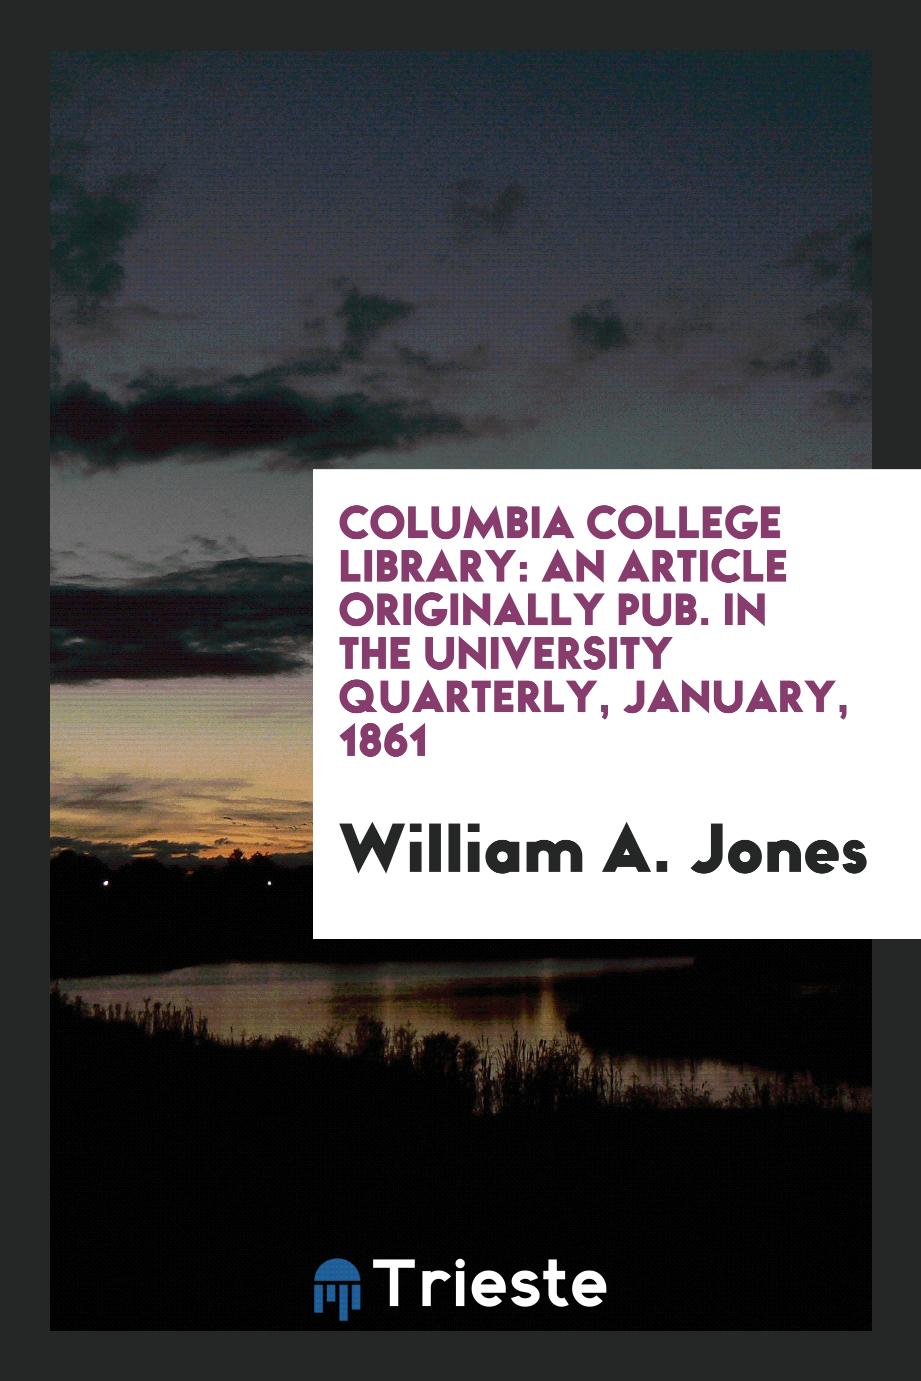 Columbia College Library: An Article Originally Pub. in the University Quarterly, January, 1861